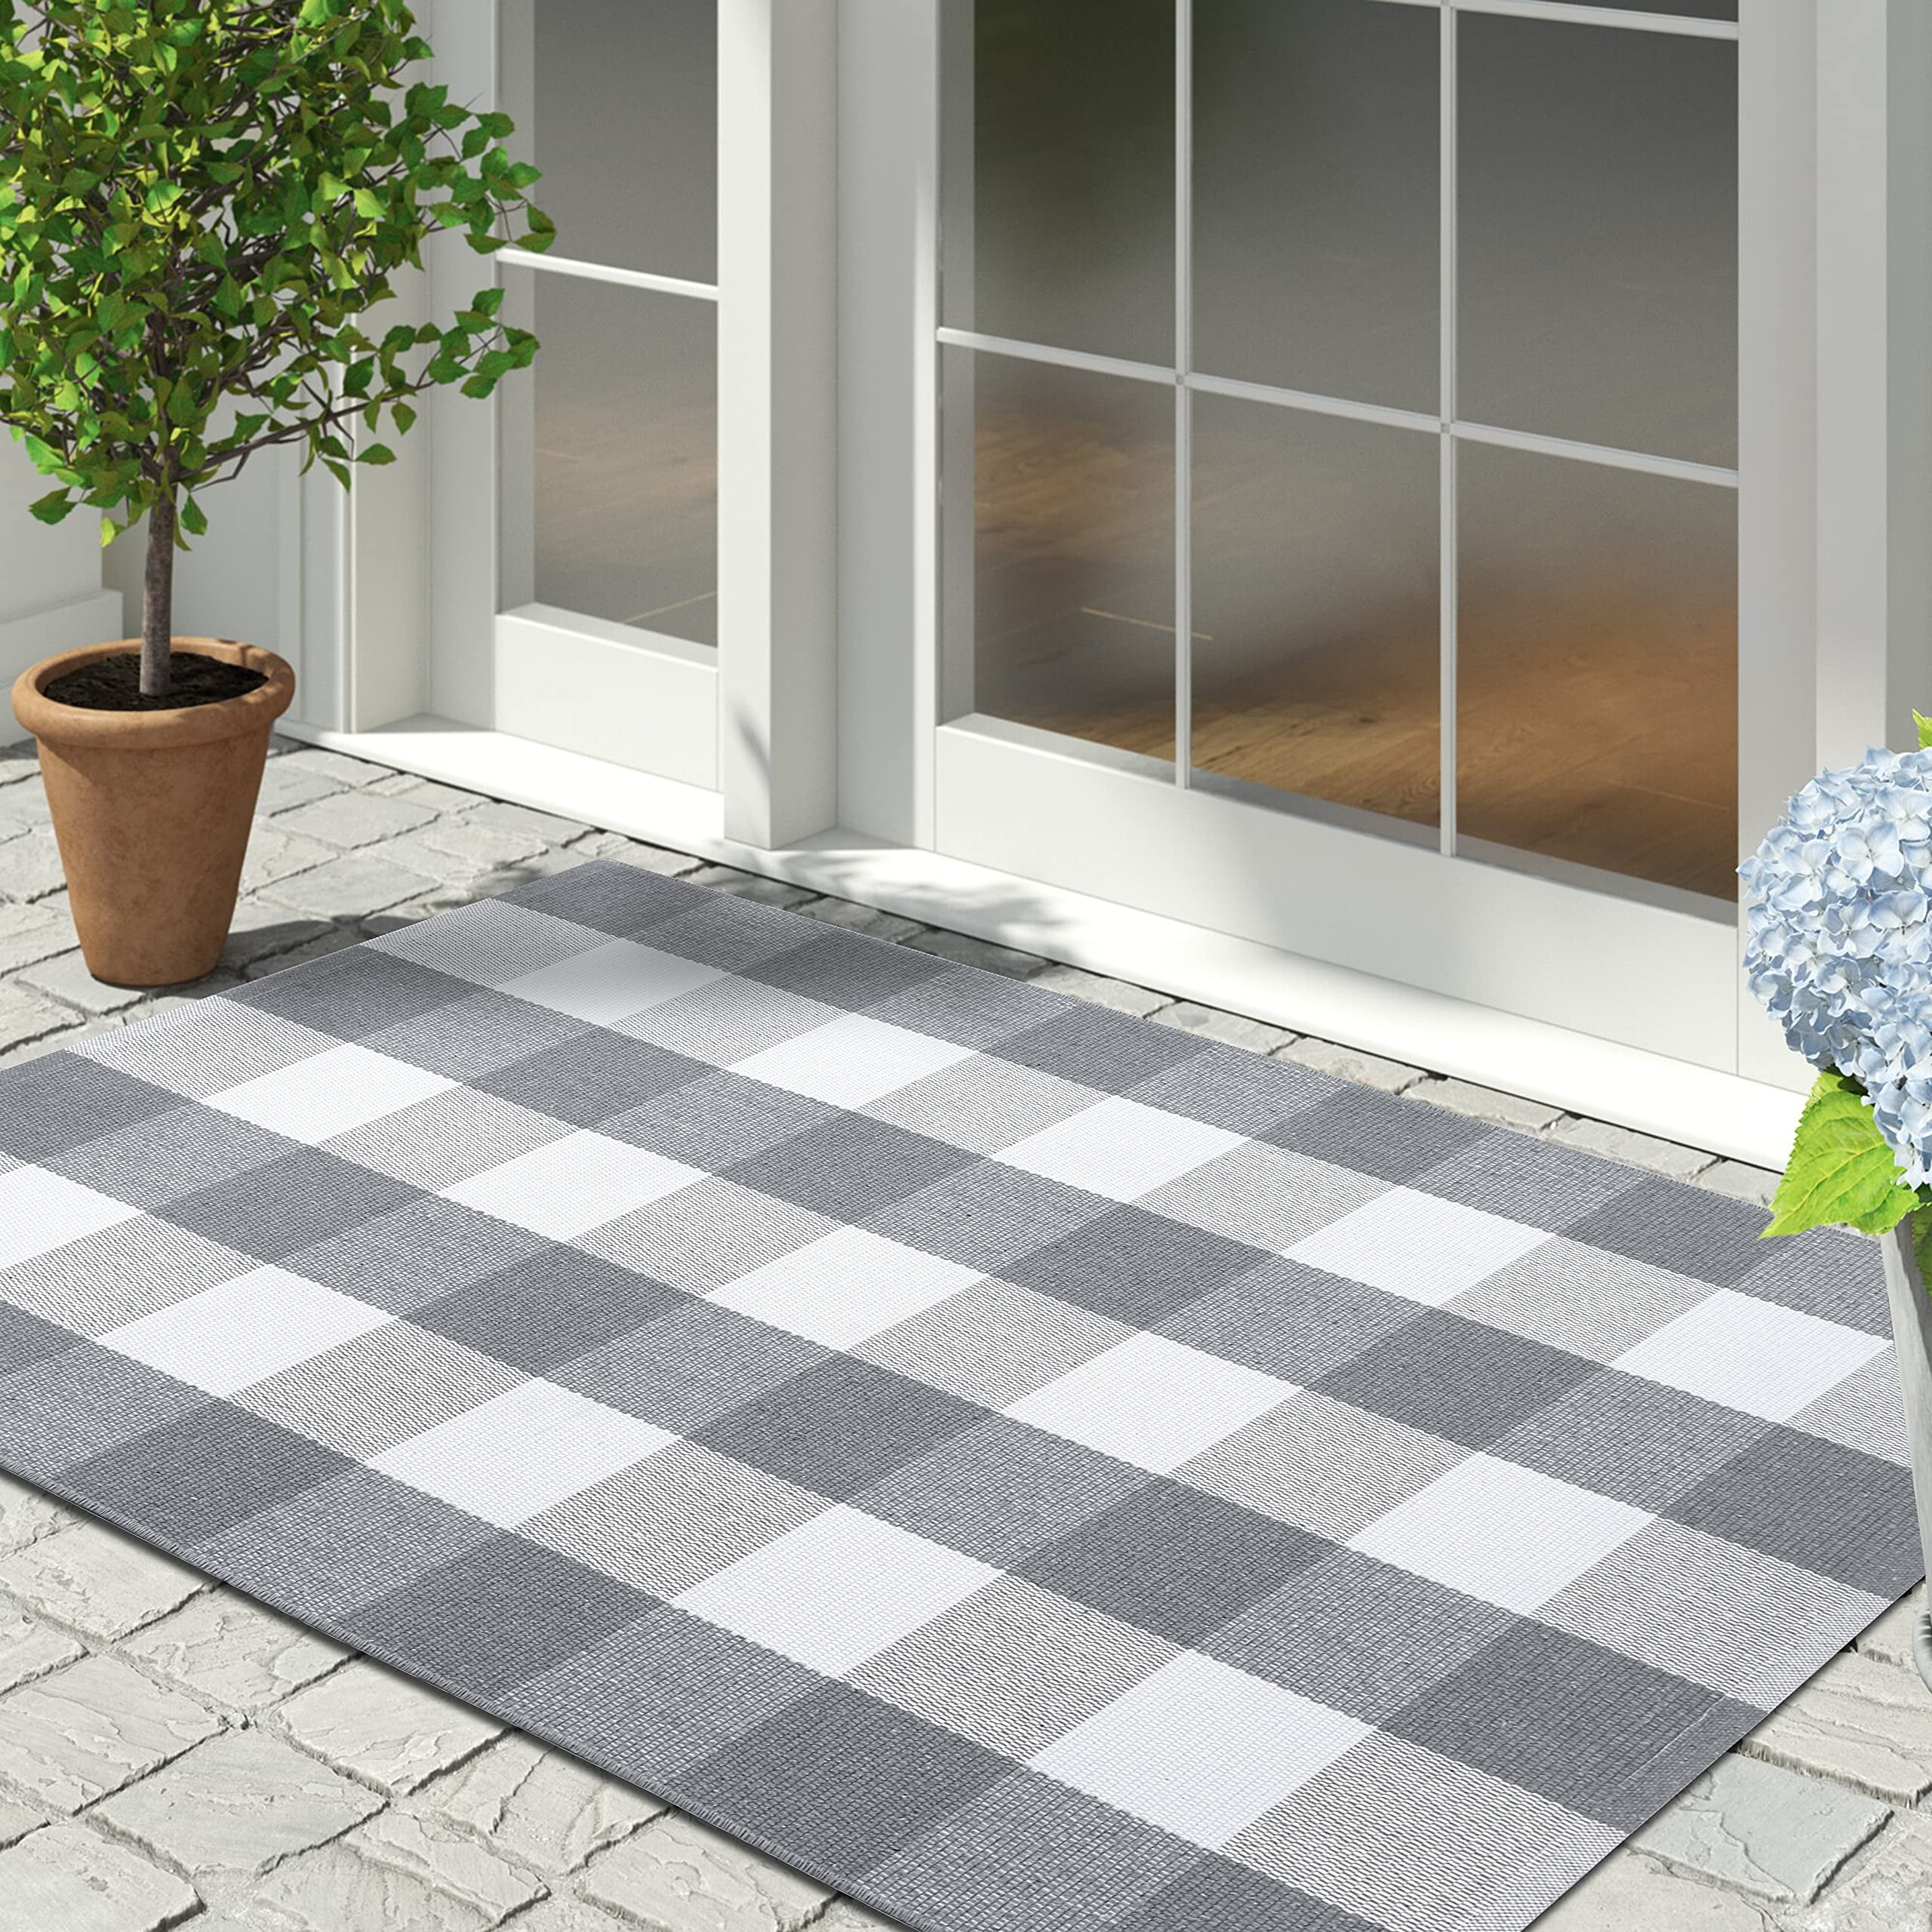 Ruggable - With new washable doormats, layering never looked so good. 😍  (via @raising3foodies) Rug: Honeycomb Home Doormat & Outdoor Gingham Black  & White